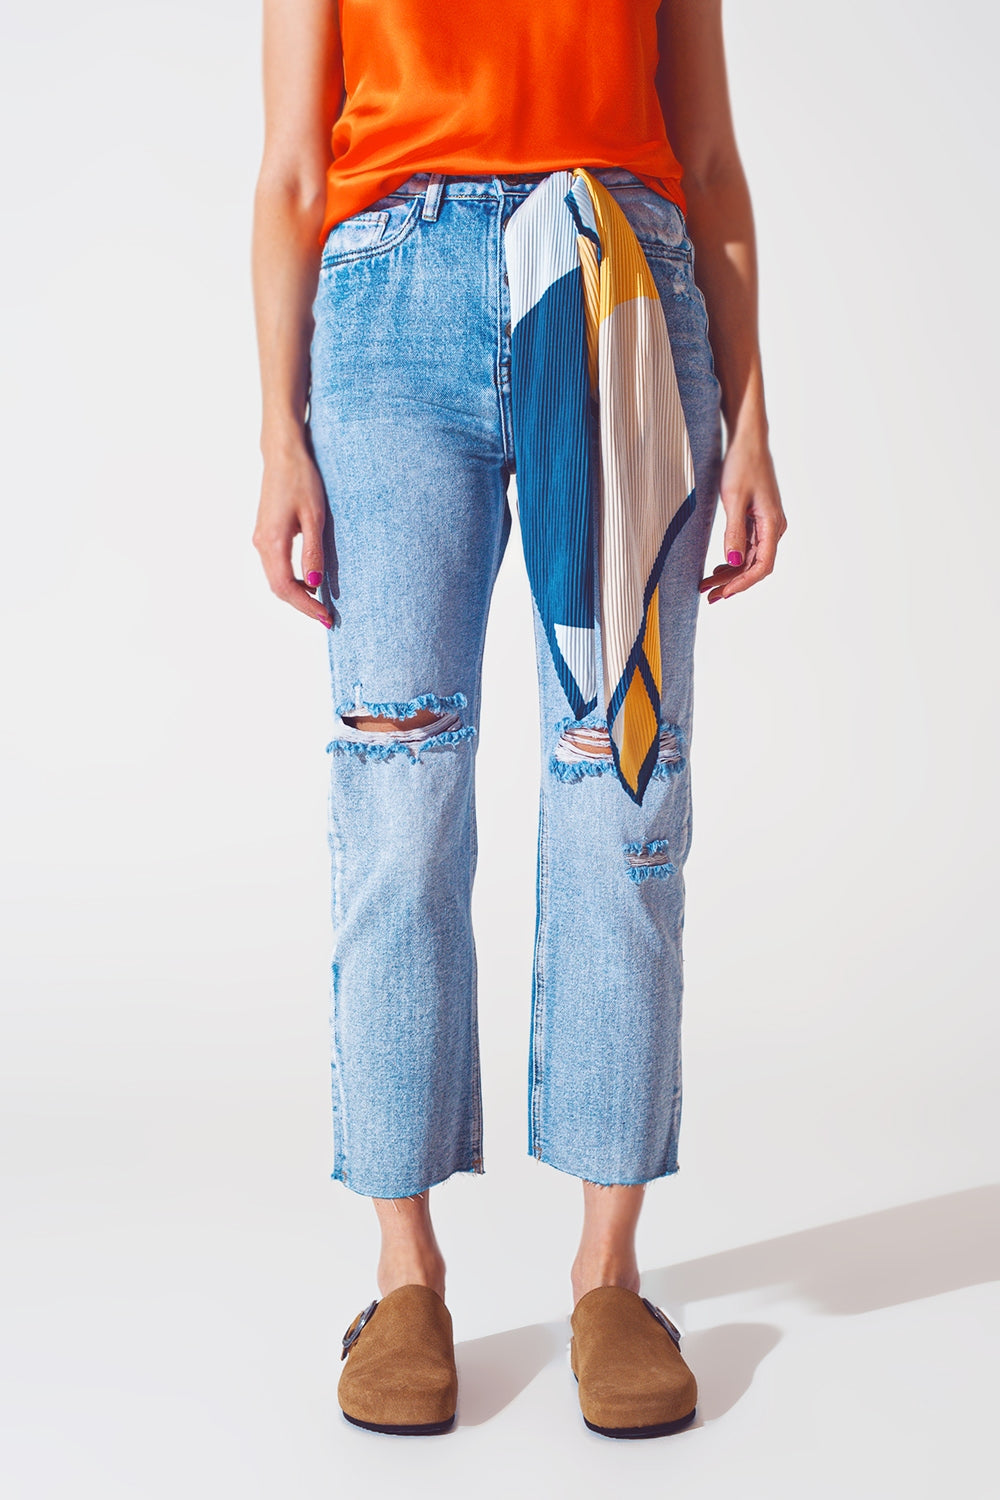 Q2 Sraight-leg jeans with exposed buttons and ripped knees in light wash